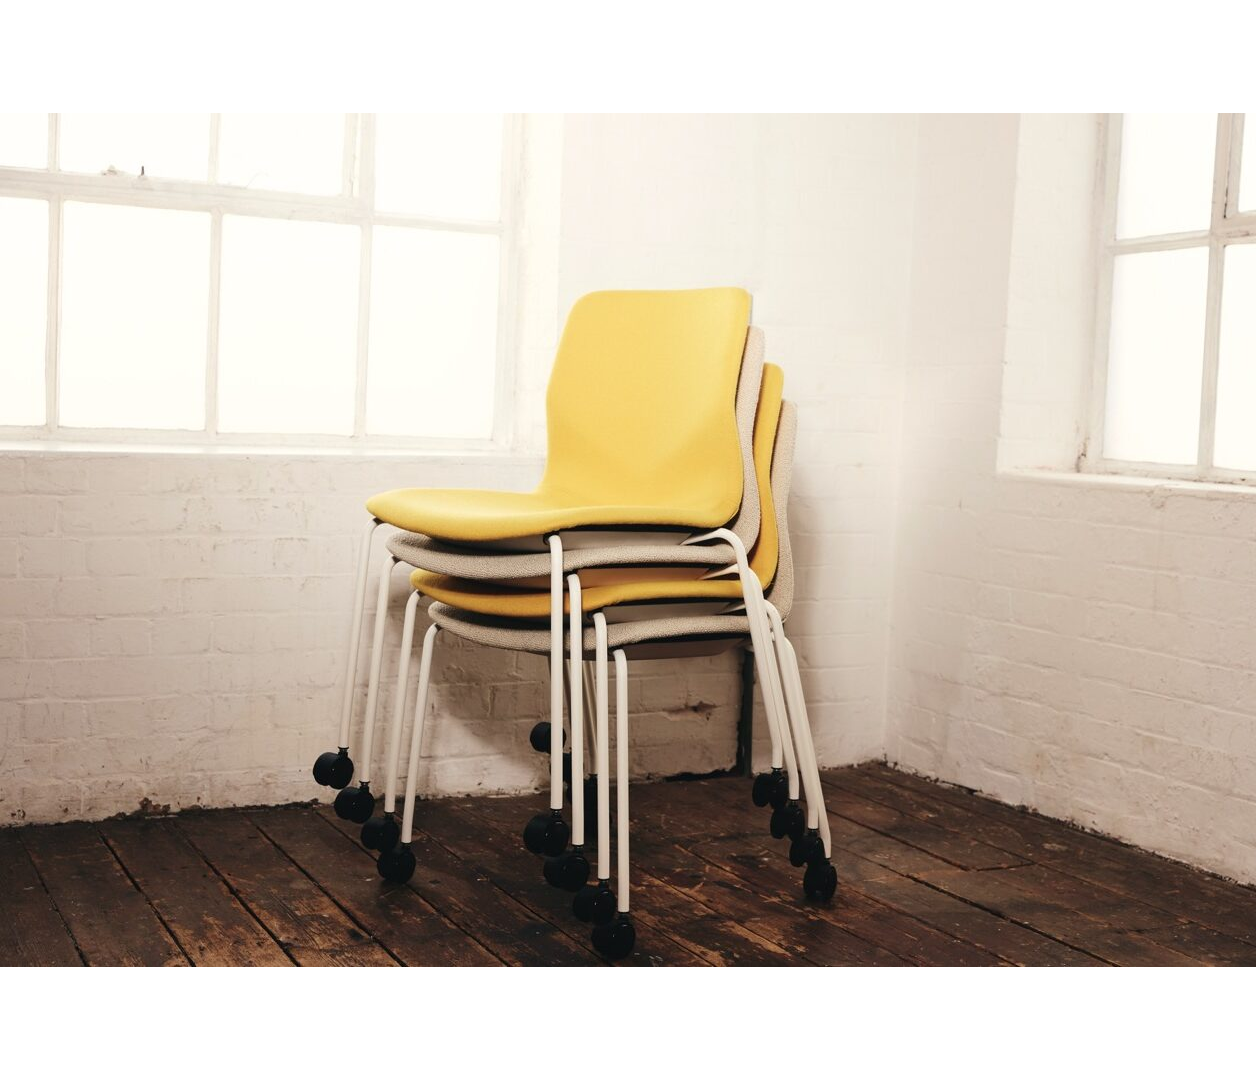 OCEE&FOUR – Chairs – FourSure 77 – Lifestyle Image 19 Large